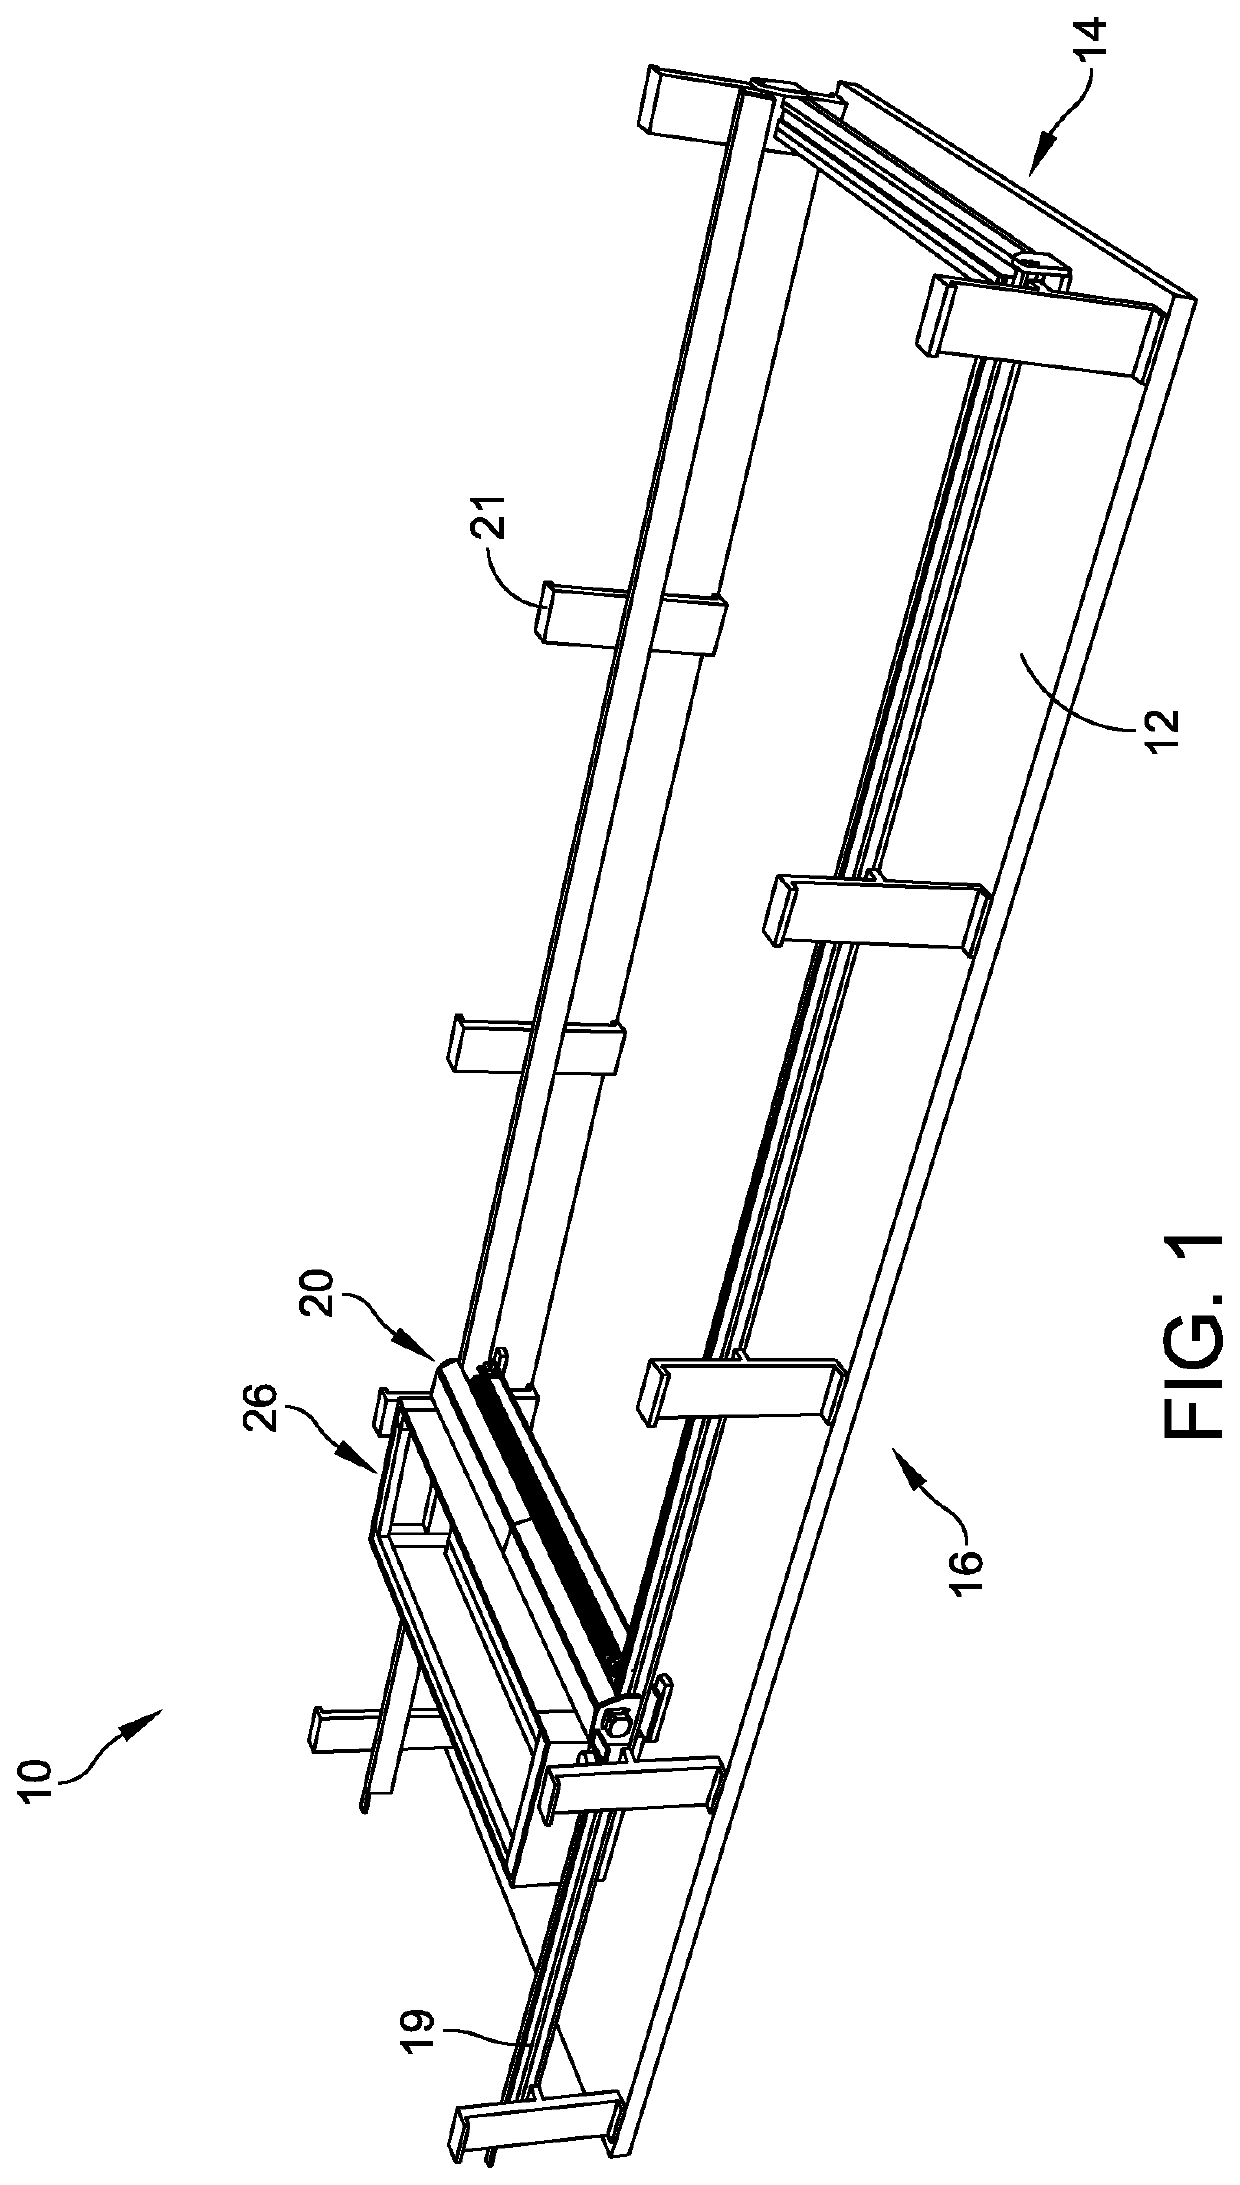 Horticulture apparatus and method